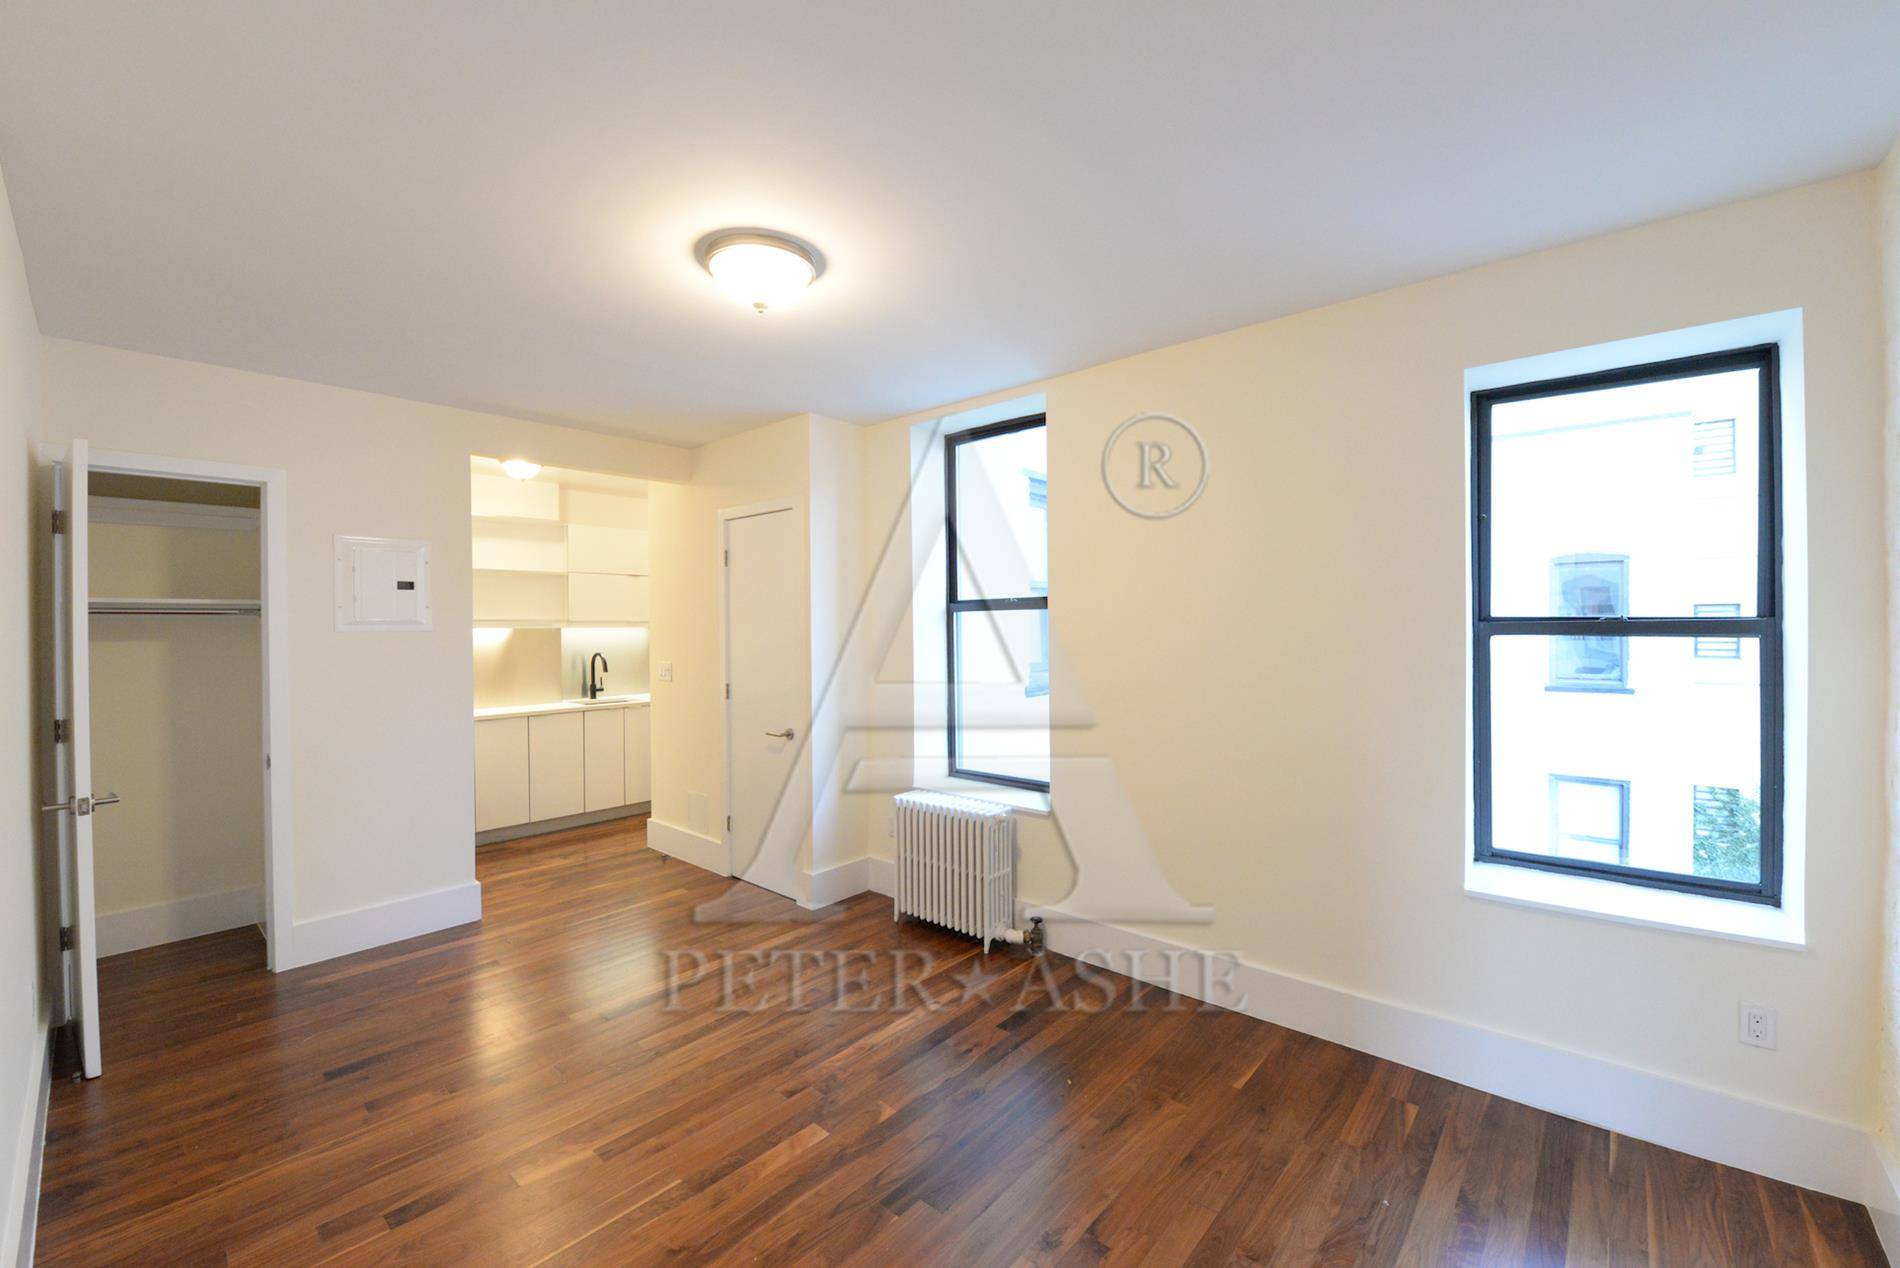 Landlord is offering two months free, advertised rent is net effective rent455 Hudson Street Historically Charmed Residences____________________________________________________Apartment 18 is a perfectly laid out, sun blasted and spacious one bedroom resi